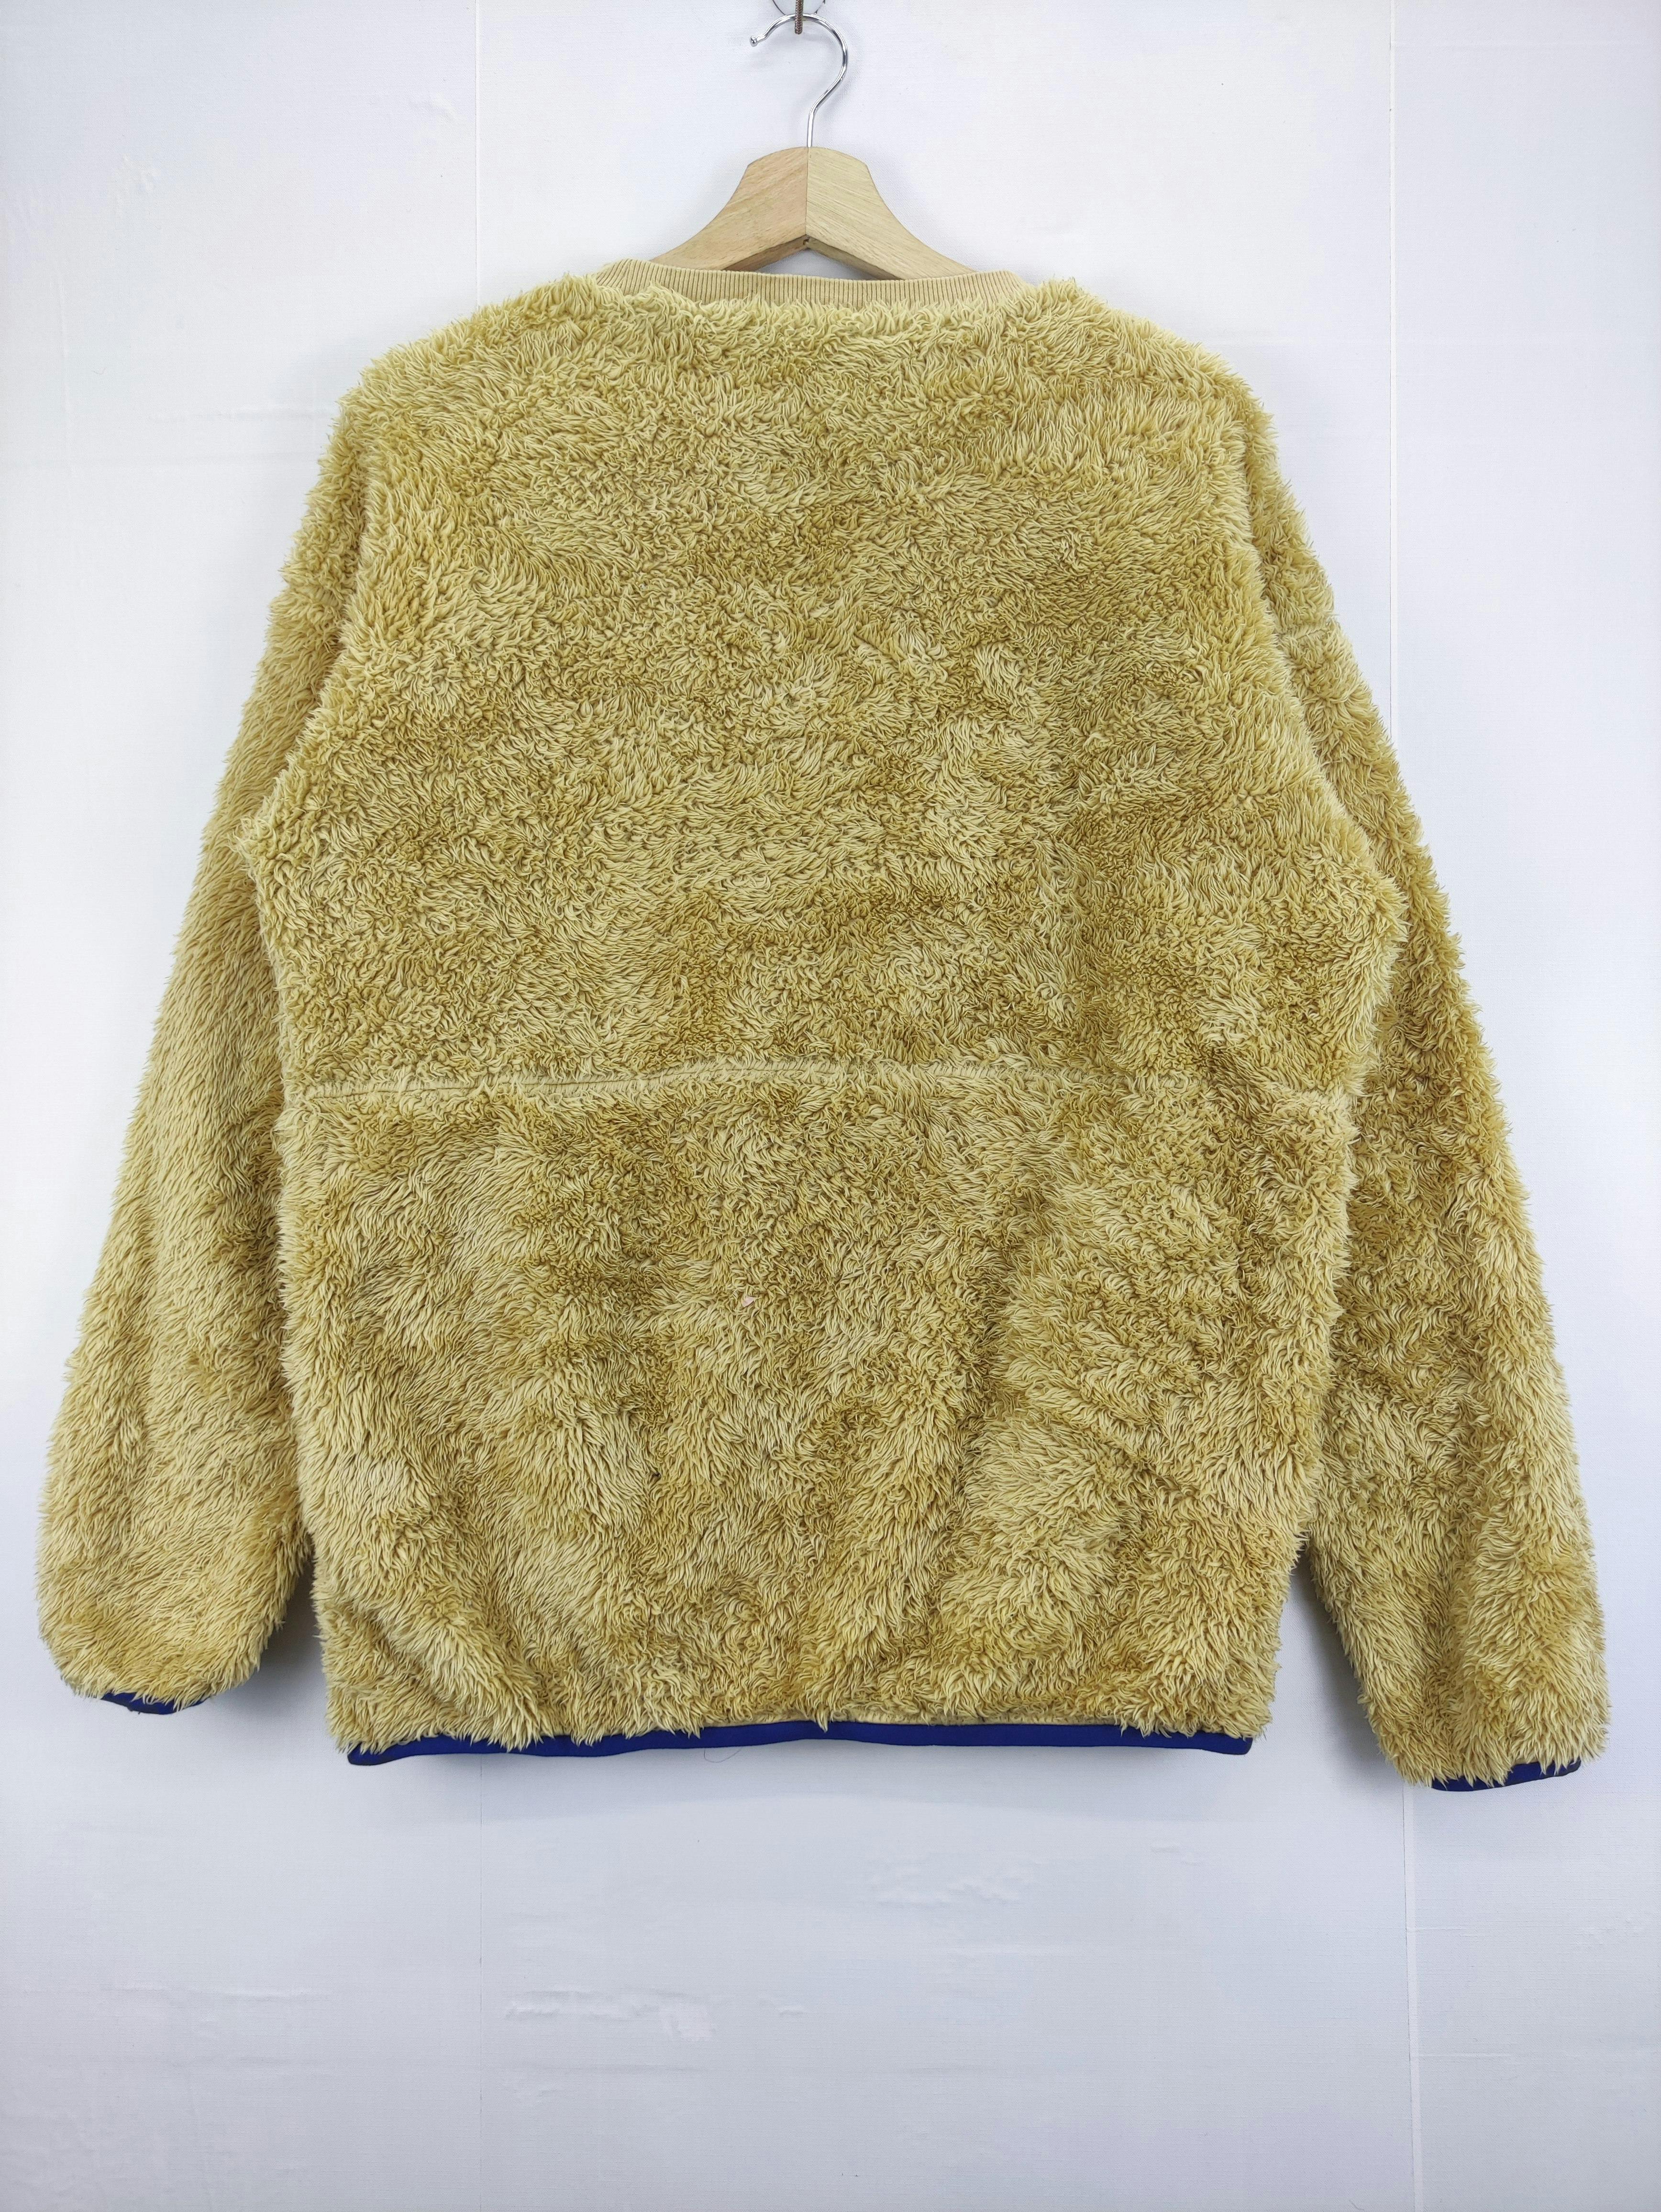 Outdoor Style Go Out! - Vintage Columbia Fleece Sweater - 7